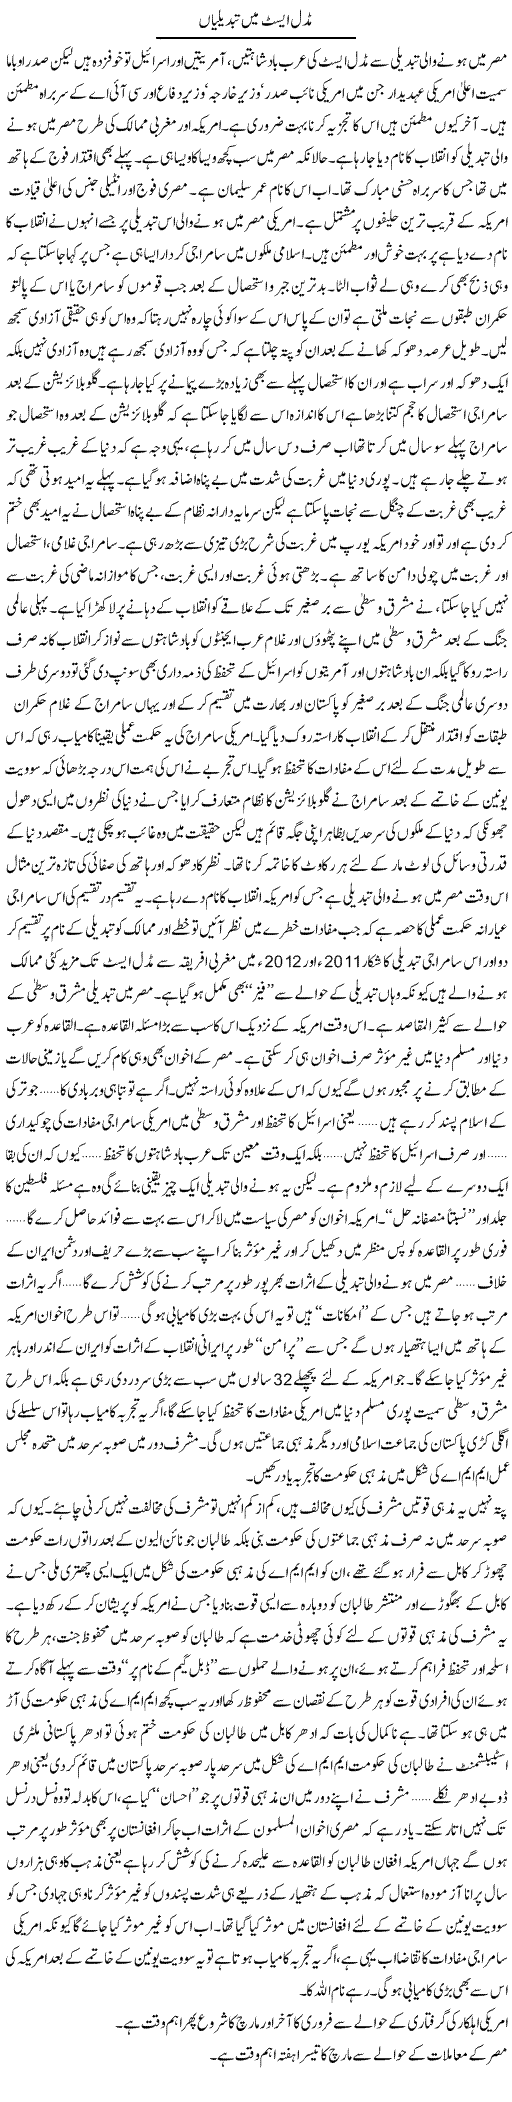 Changes in Middle East Express Column Zamrad Naqvi 21 February 2011